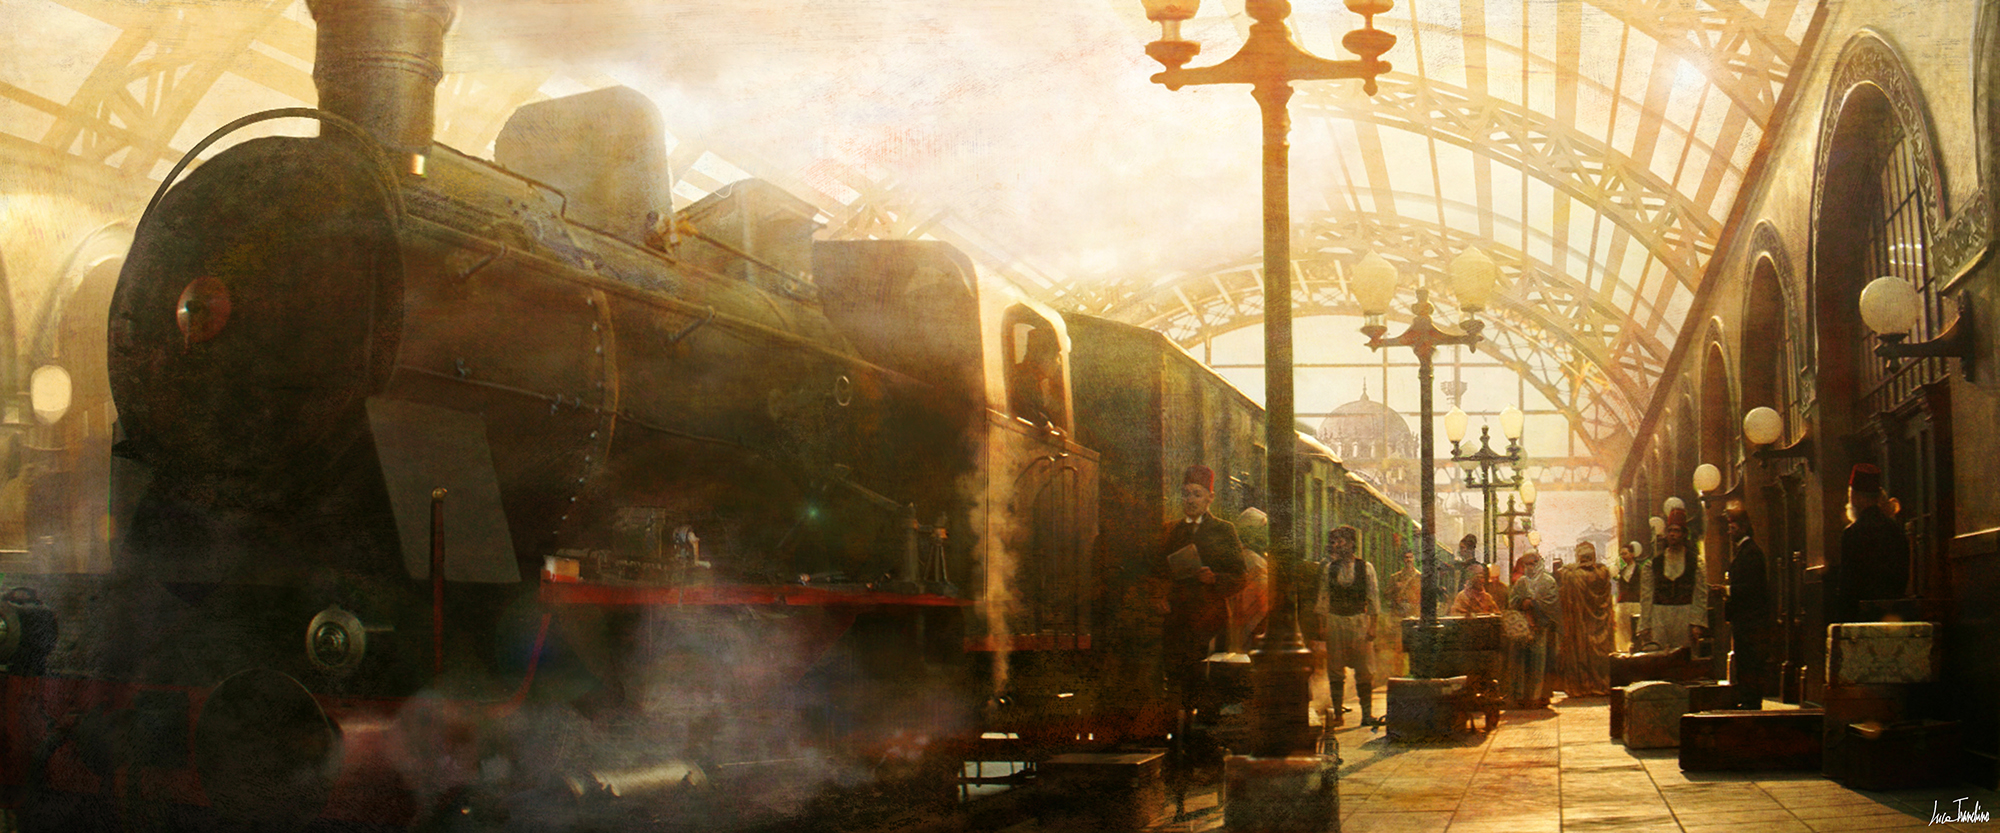 THE OTTOMAN LIEUTENANT - Directed by Joseph Ruben - Production Design by Luca Tranchino - Ext. Constantinople Train Station, Concept Art - ©2016 - Y Stone